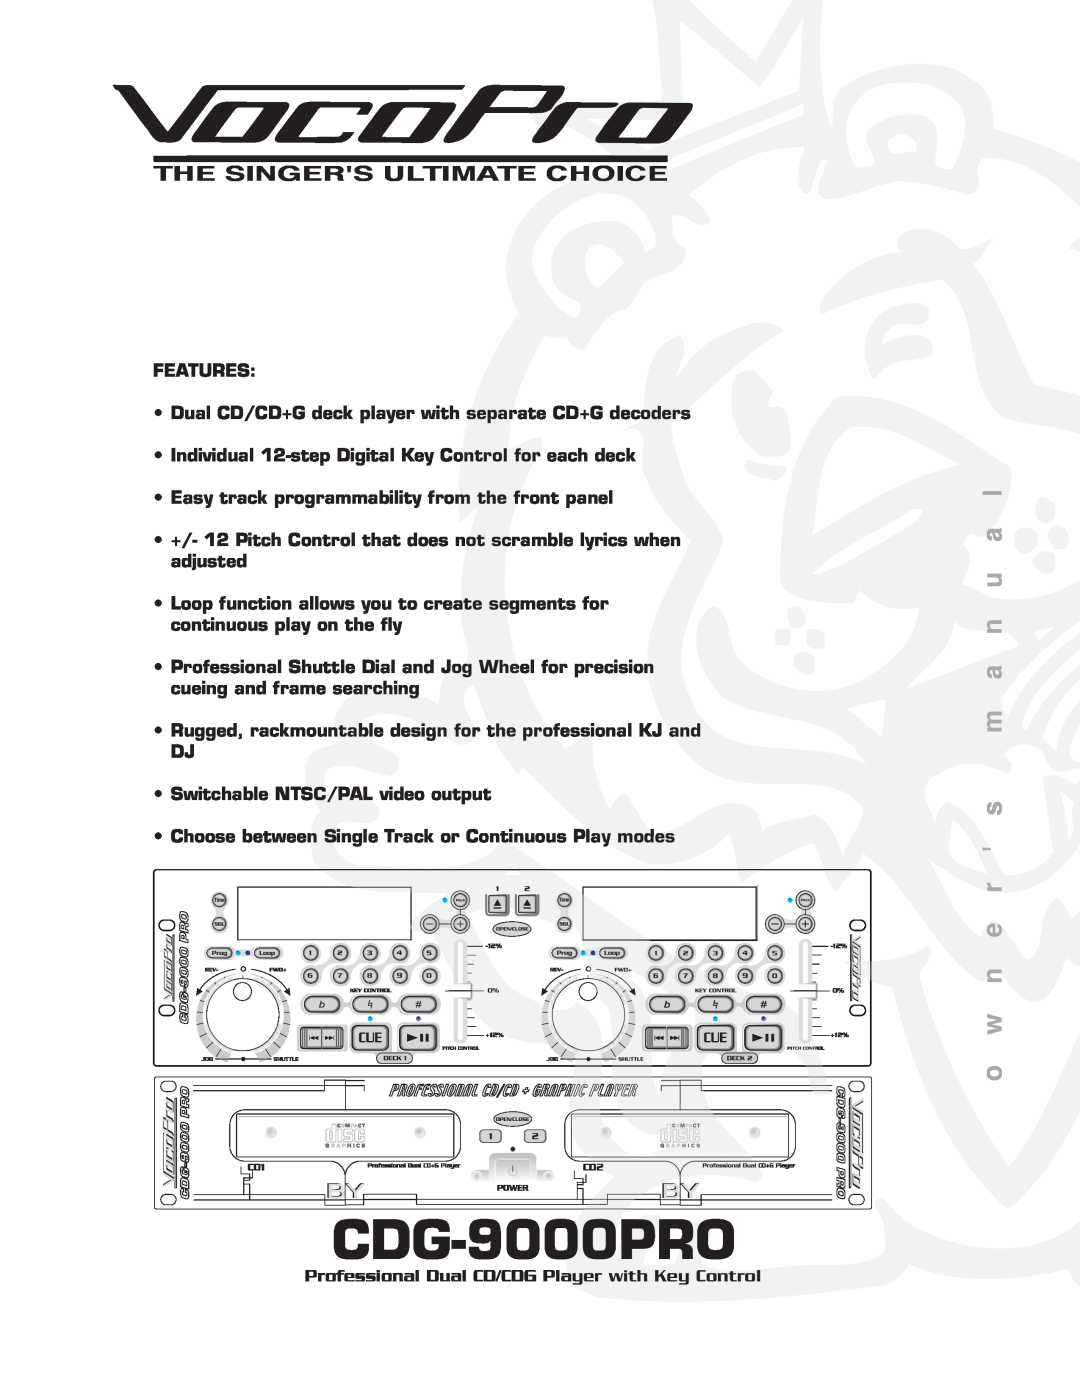 VocoPro owner manual The Singers Ultimate Choice, CDG-9000PRO, o w n e r s m a n u a l, Features 